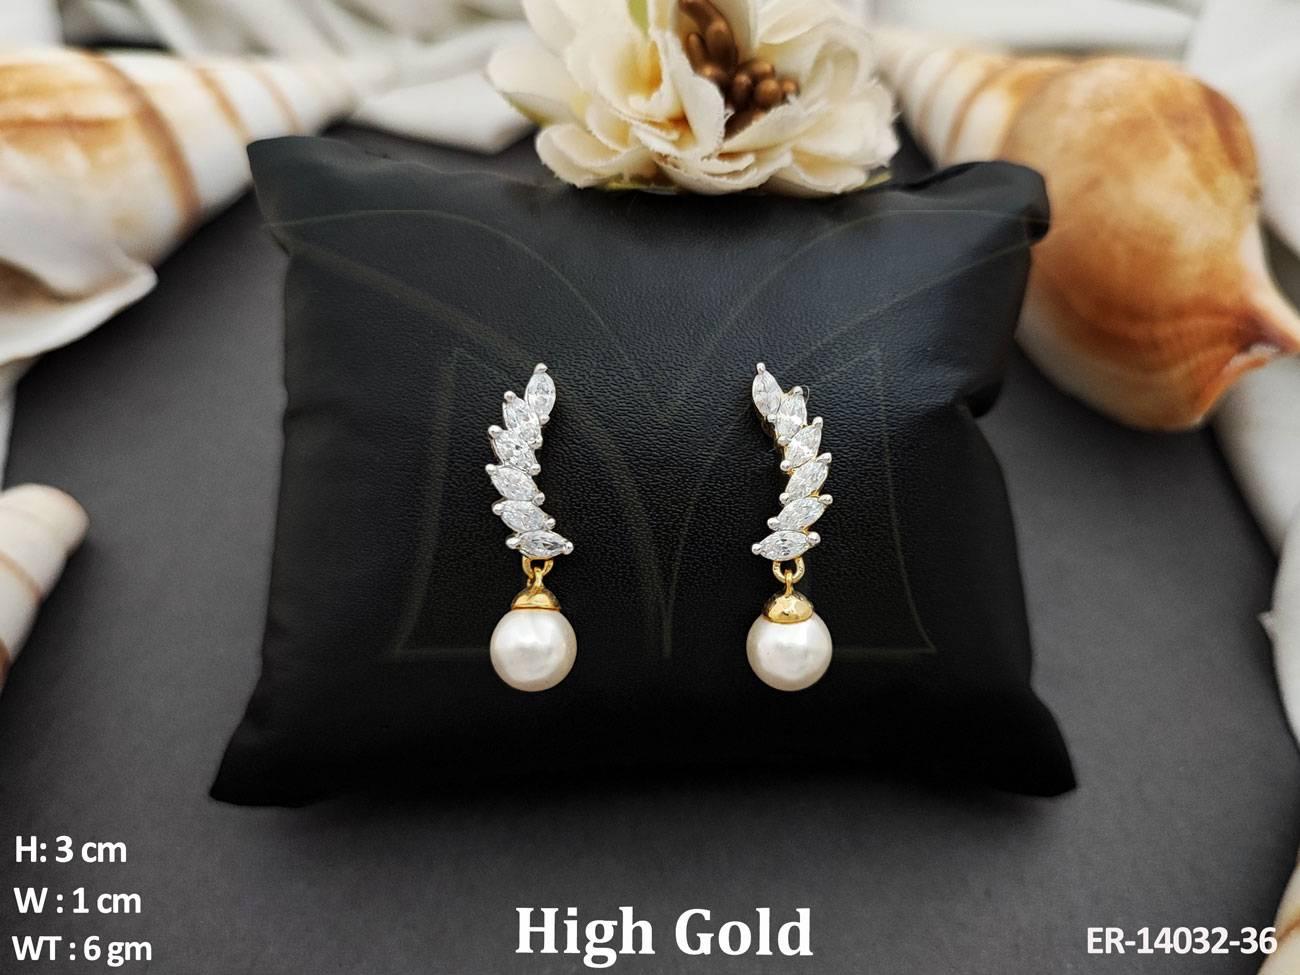 Elevate your look with our Clustered Pearl Design High Gold Polish AD Earrings.